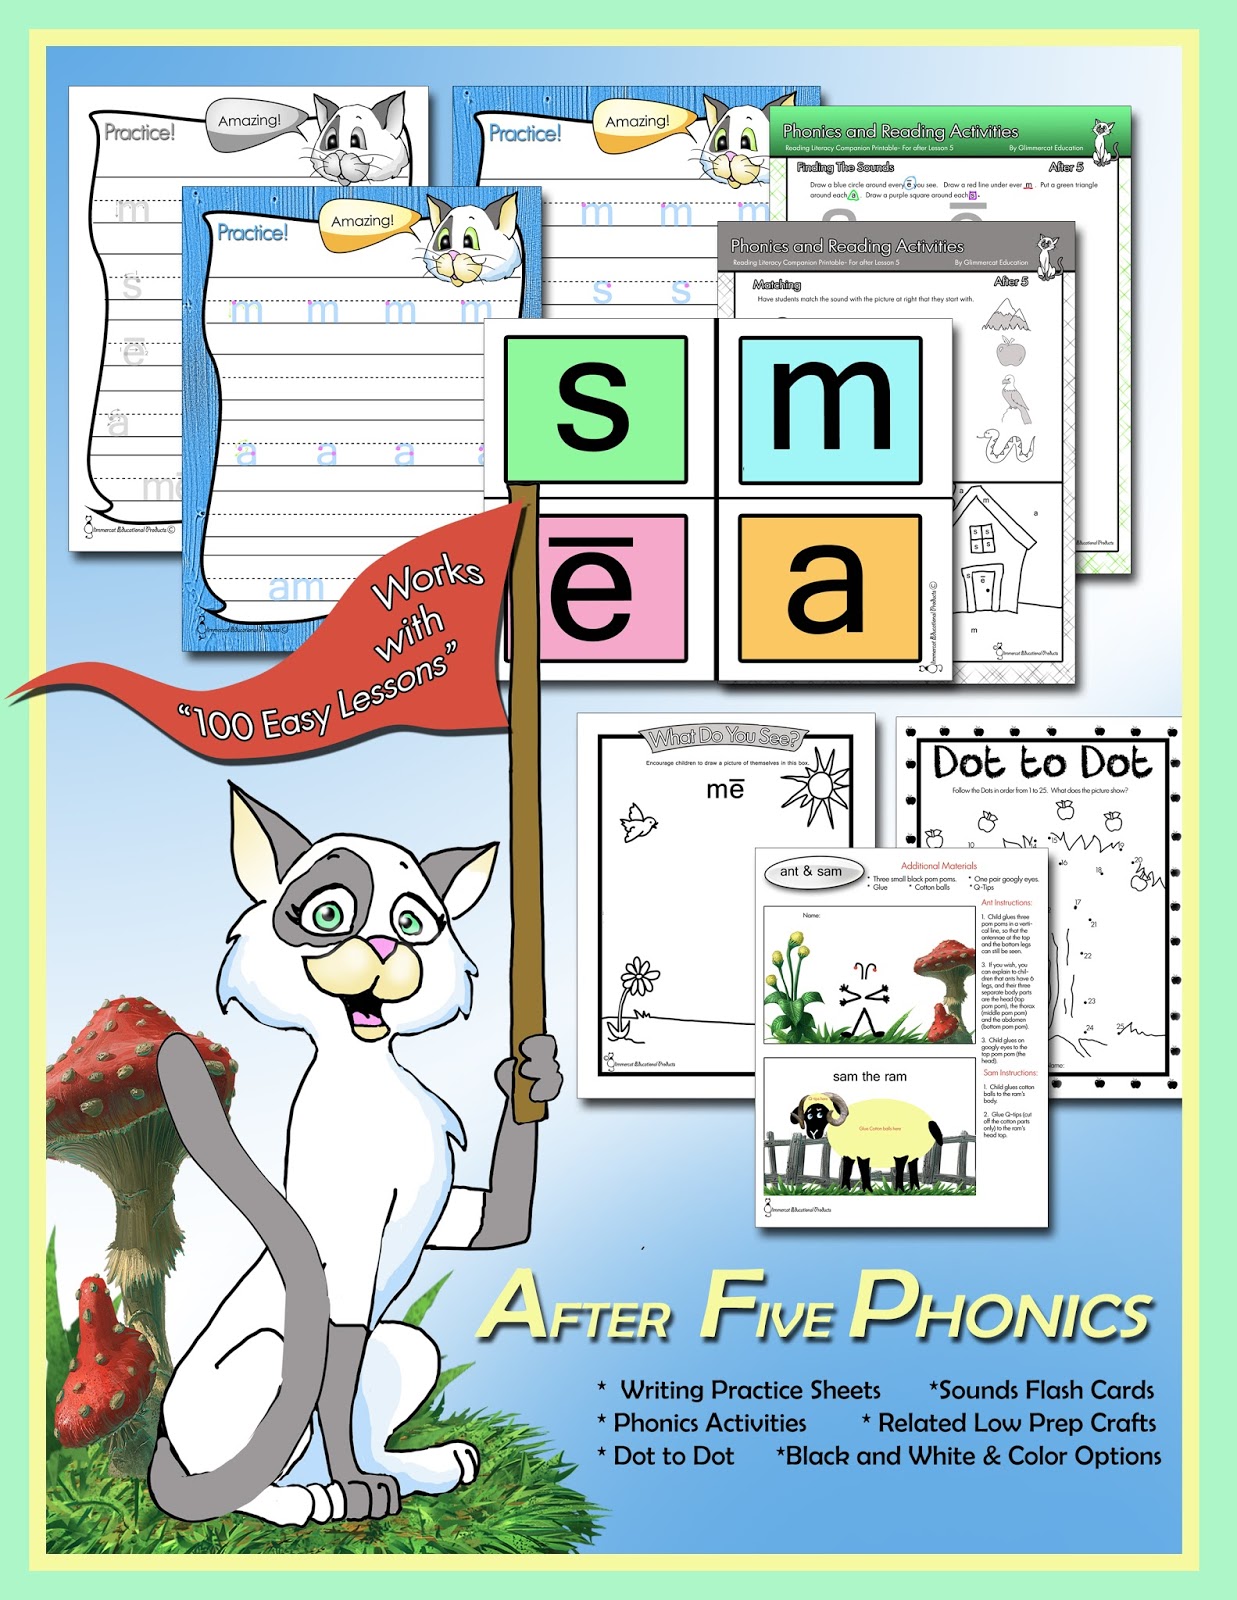 Glimmercat Education: More Printables for "Teach Your Child To Read in